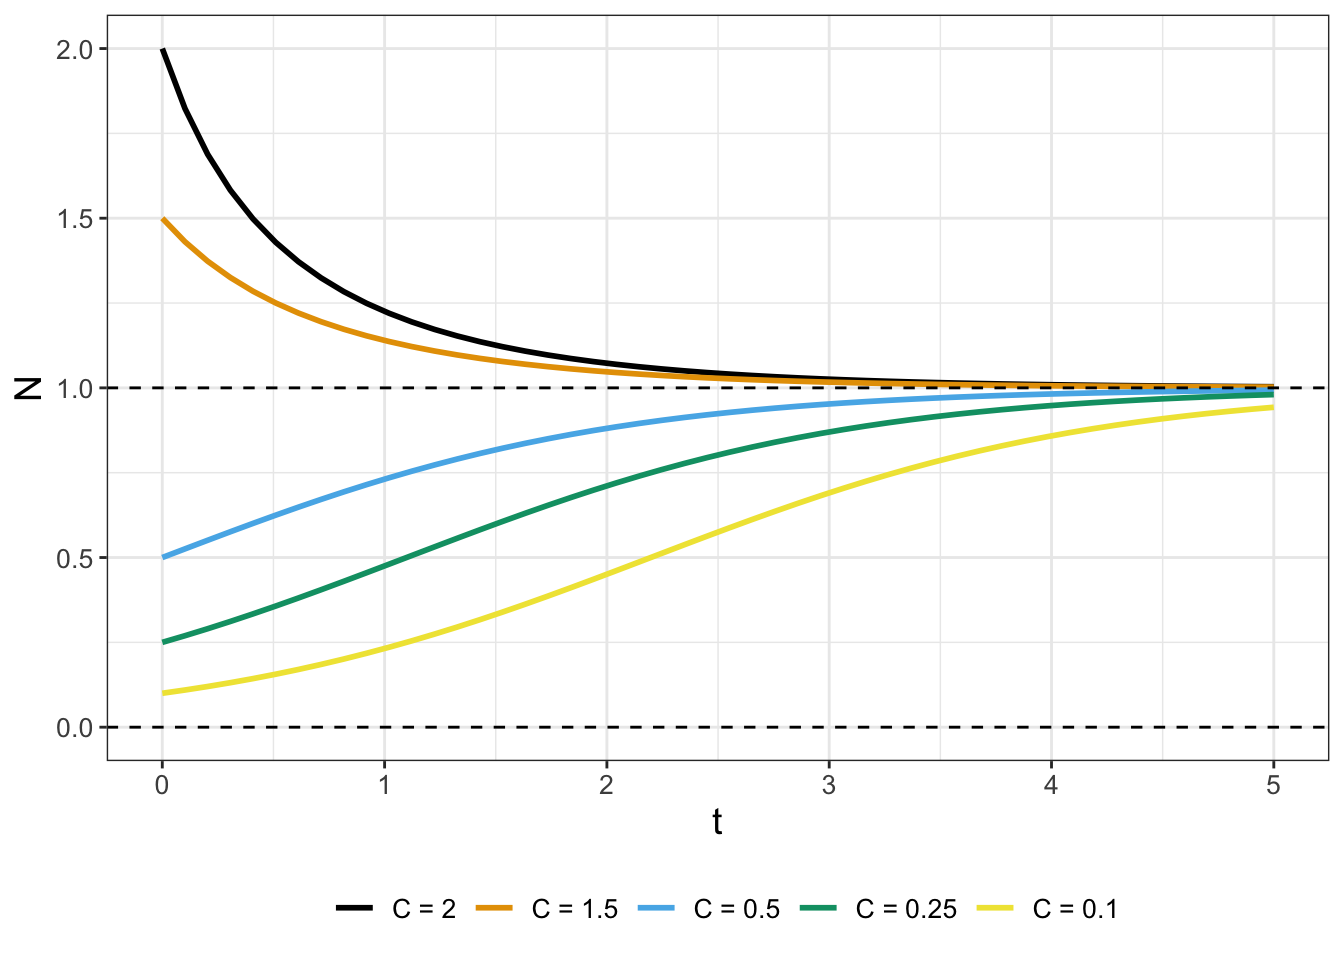 Solution curves for Equation \@ref(eq:logistic-05) with different initial conditions (values of $C$).